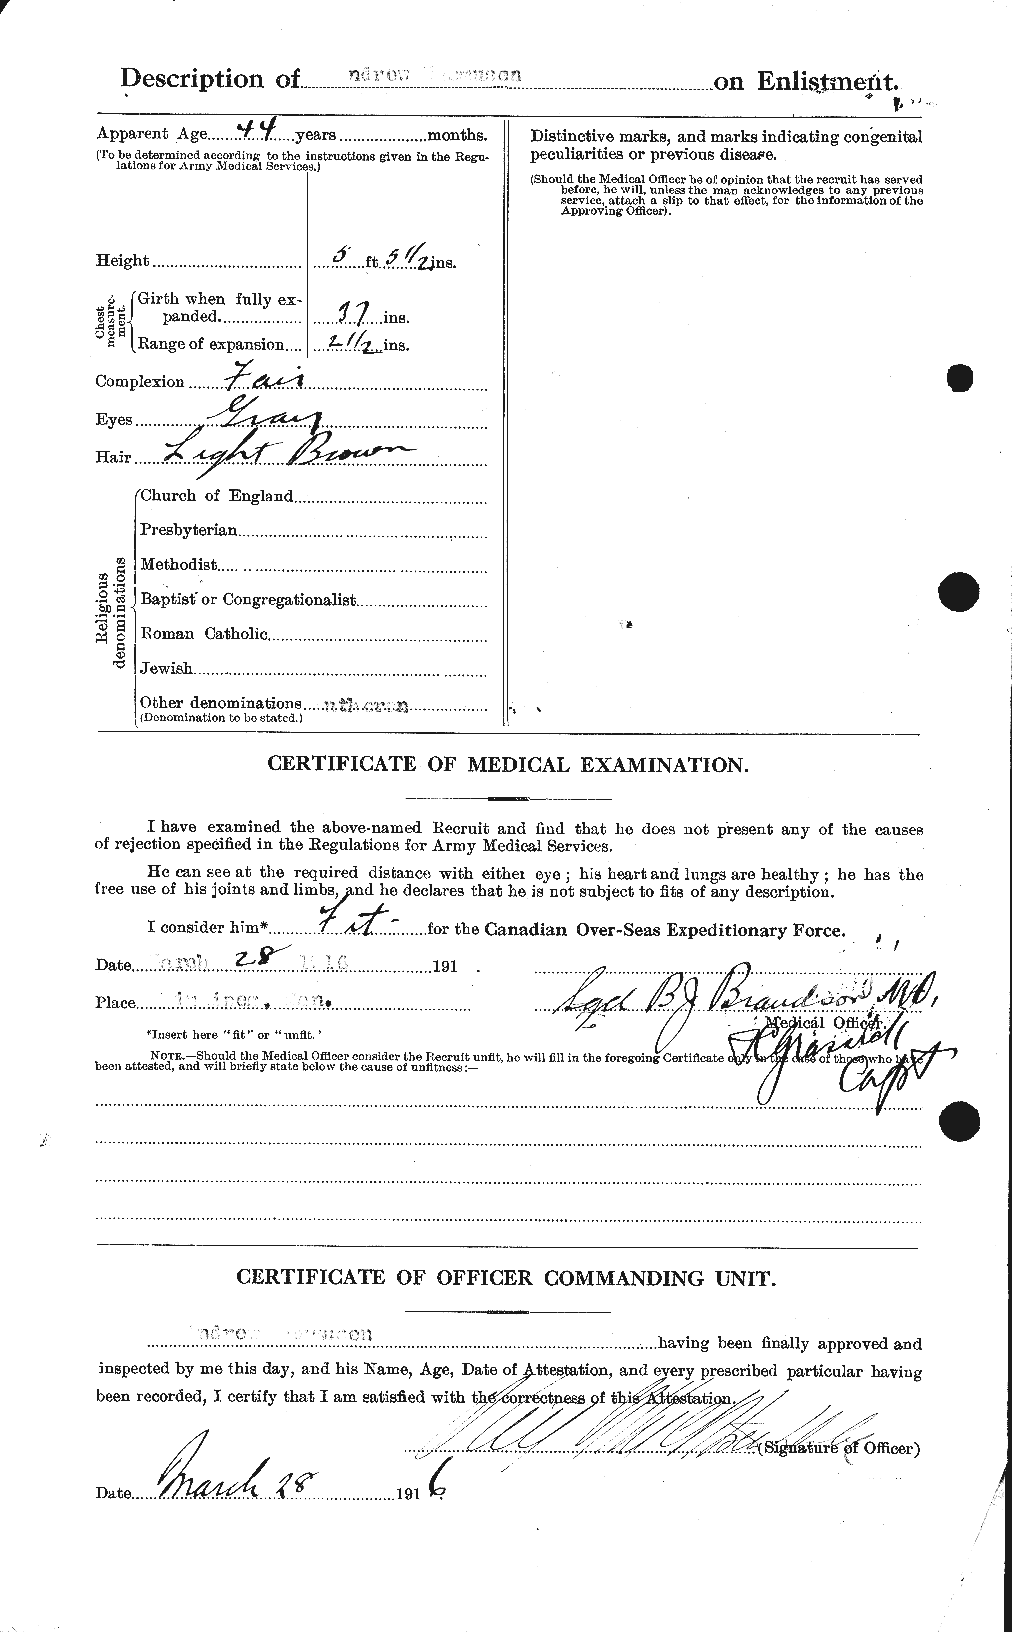 Personnel Records of the First World War - CEF 595043b